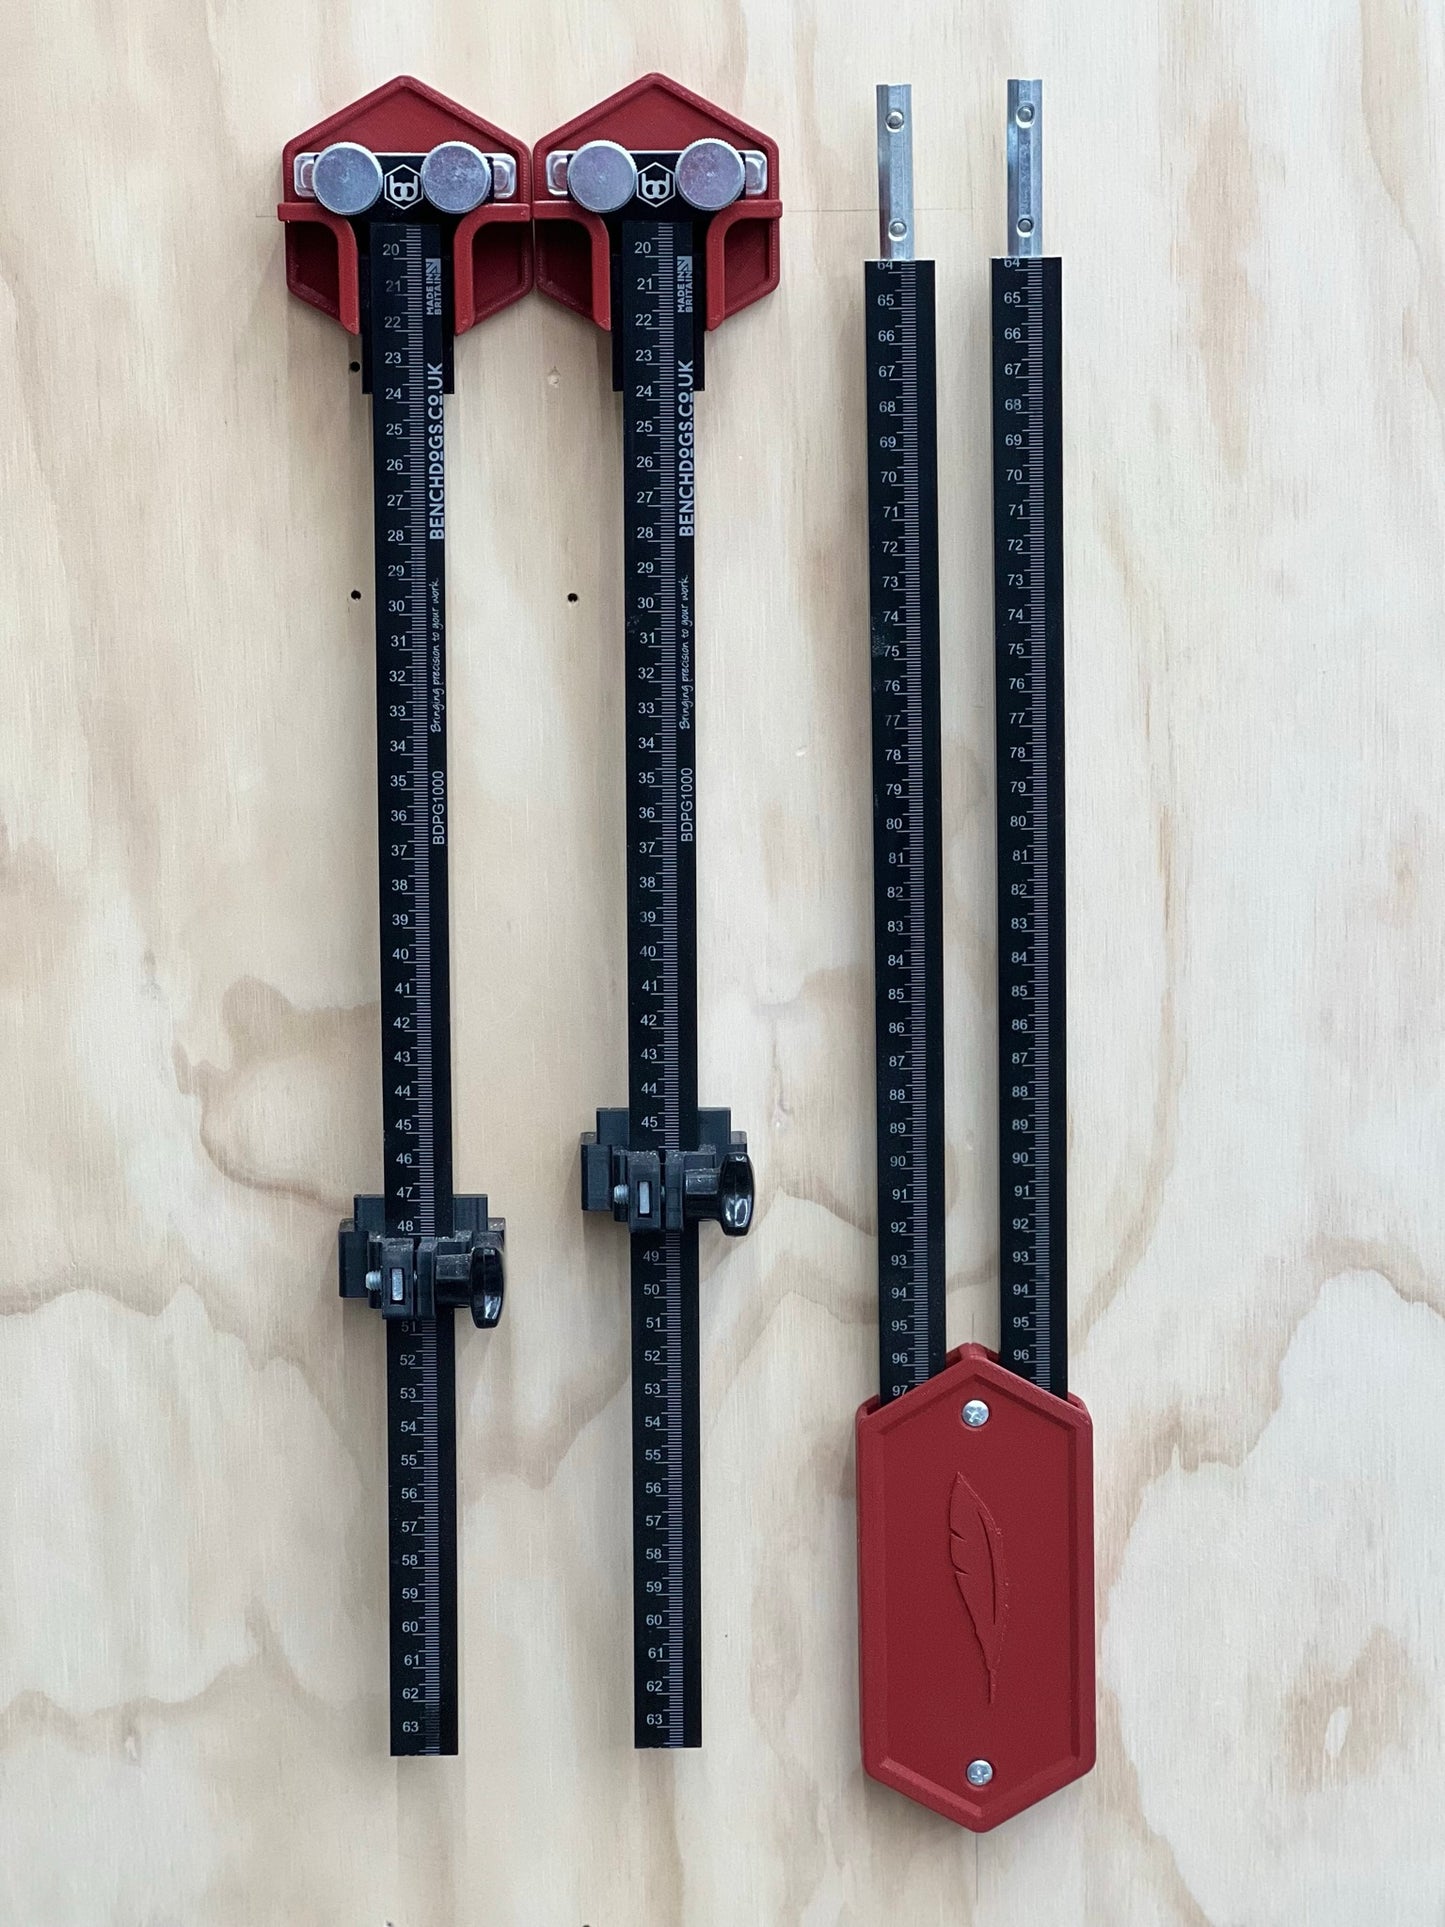 Wall Holder for  Benchdog's Parallel Guides and Extension Bars